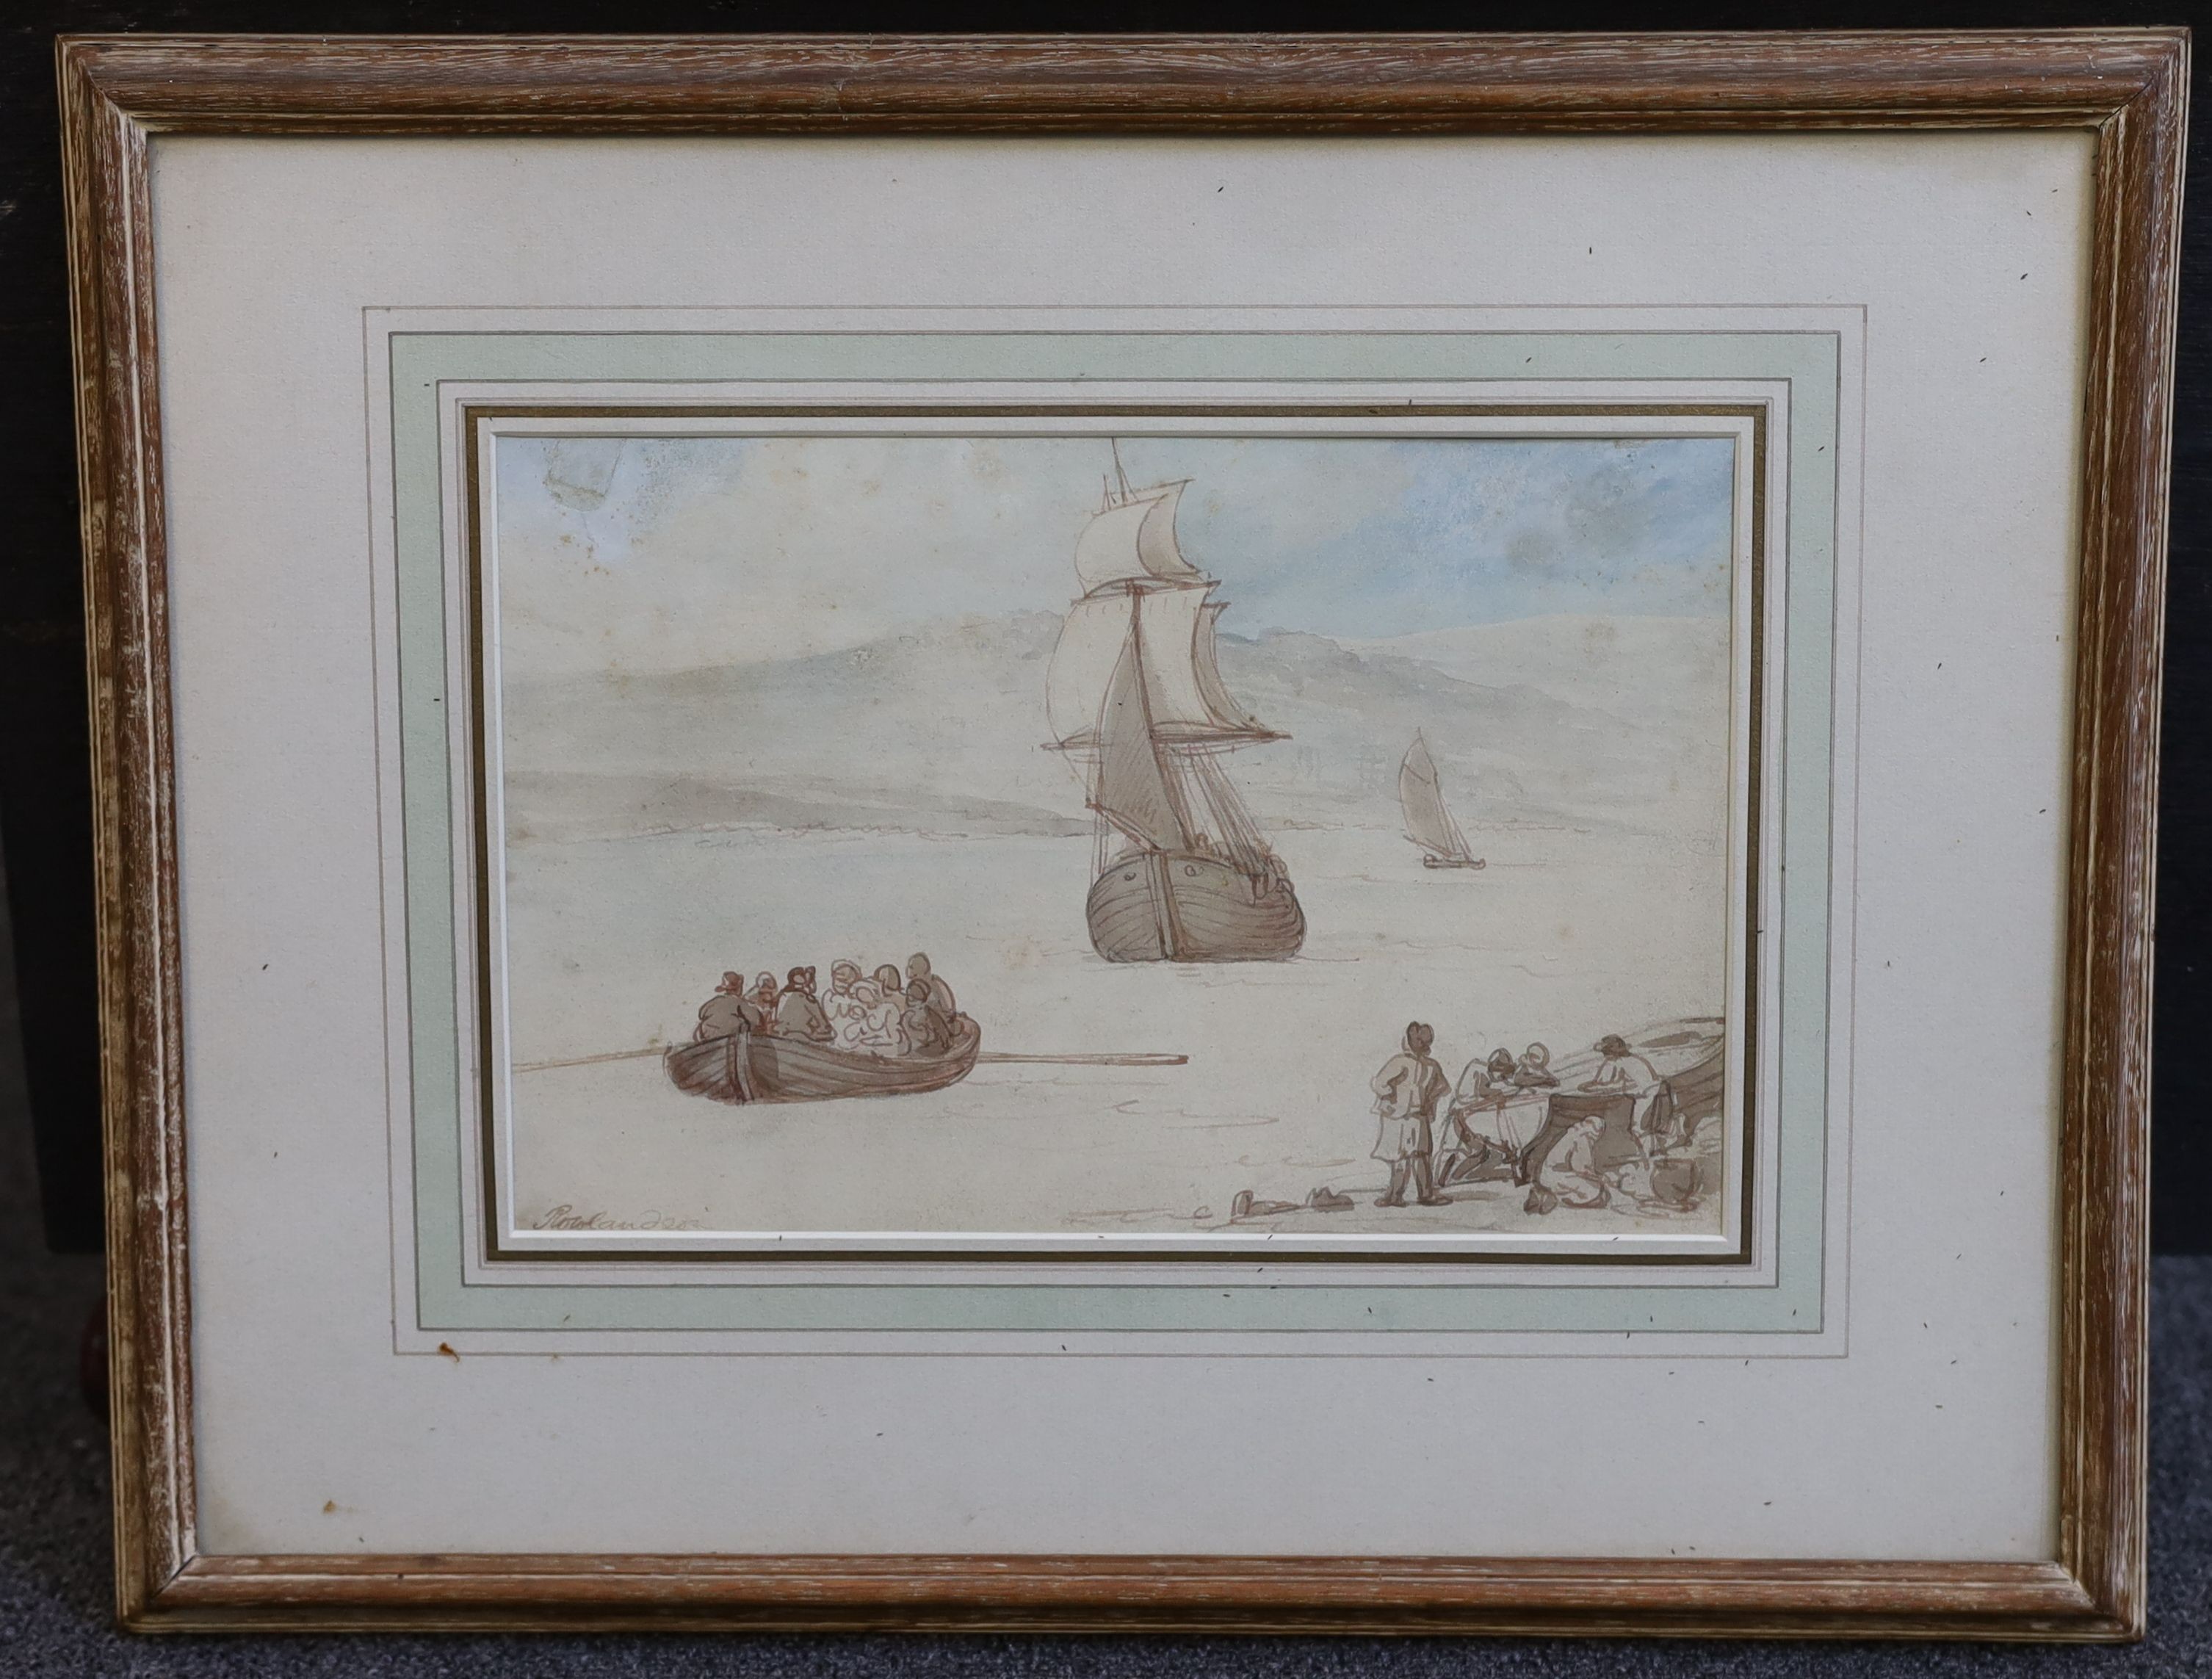 Thomas Rowlandson (1756-1827), 'Embarking', coastal scene with figures in a rowing boat, a sailing ship beyond and boatmen on the shore, ink and watercolour, 17 x 26cm